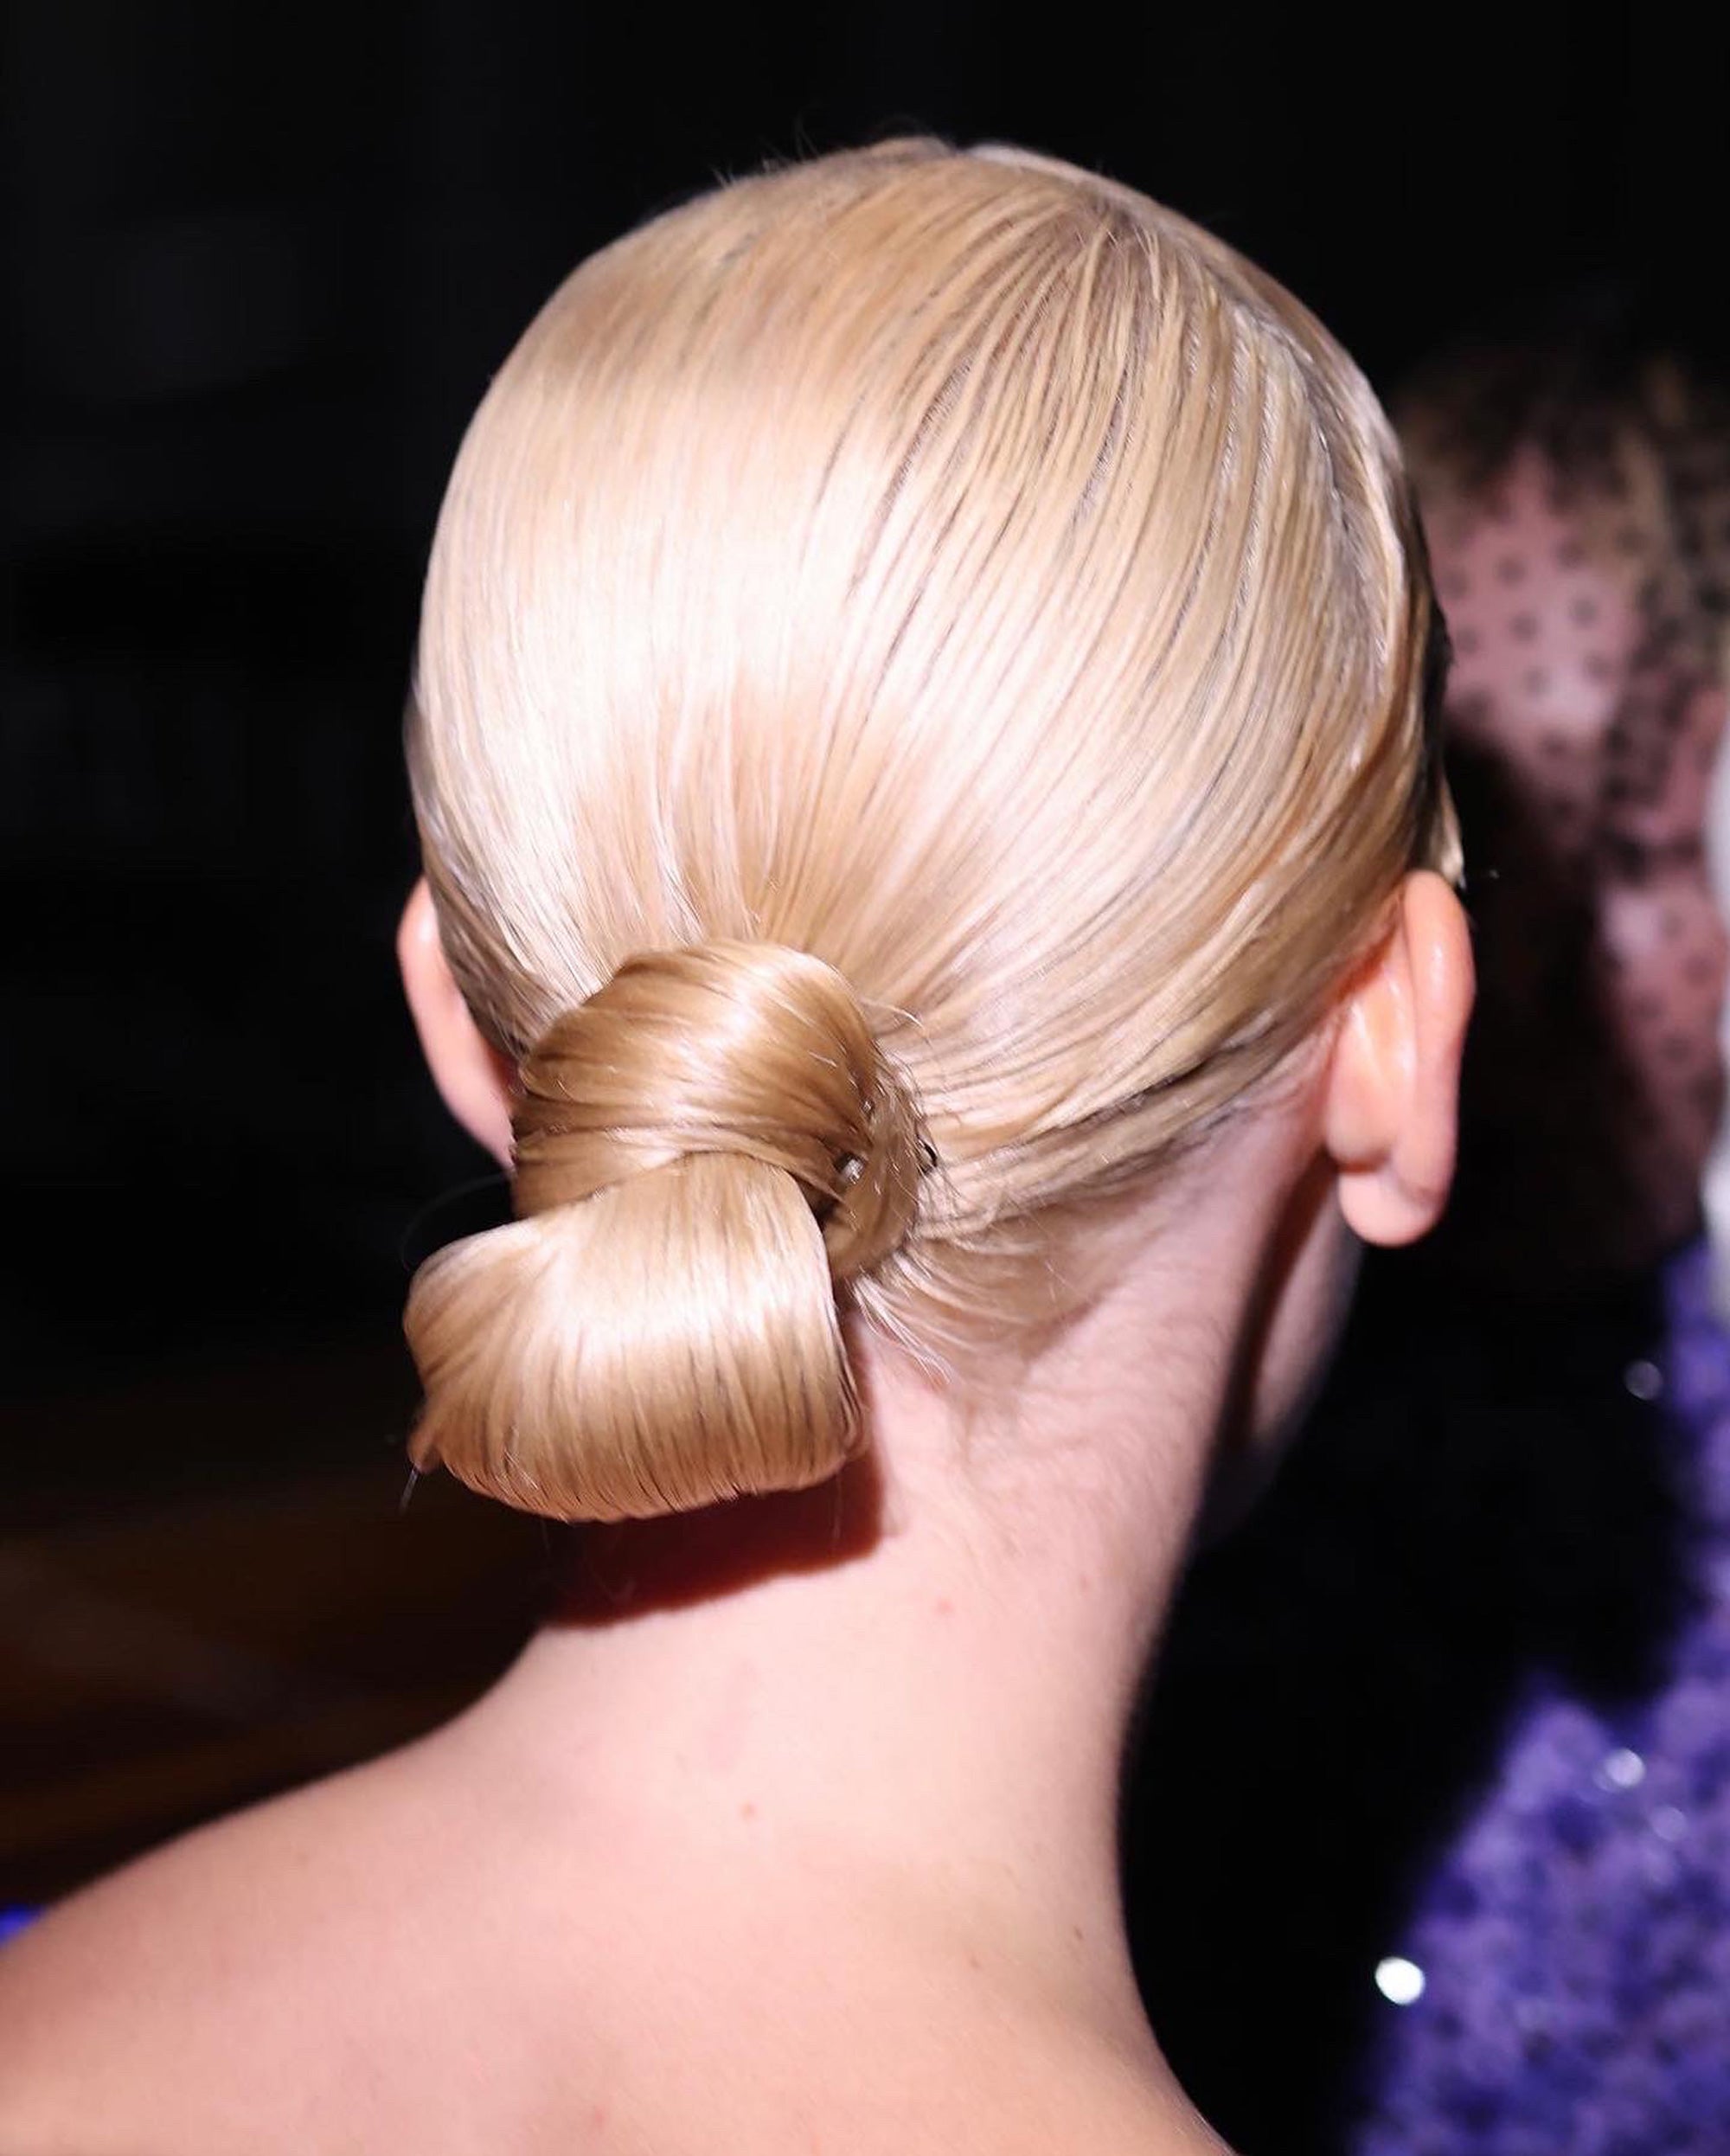 Runway to reality: 5 catwalk hairstyles you'll actually want to do